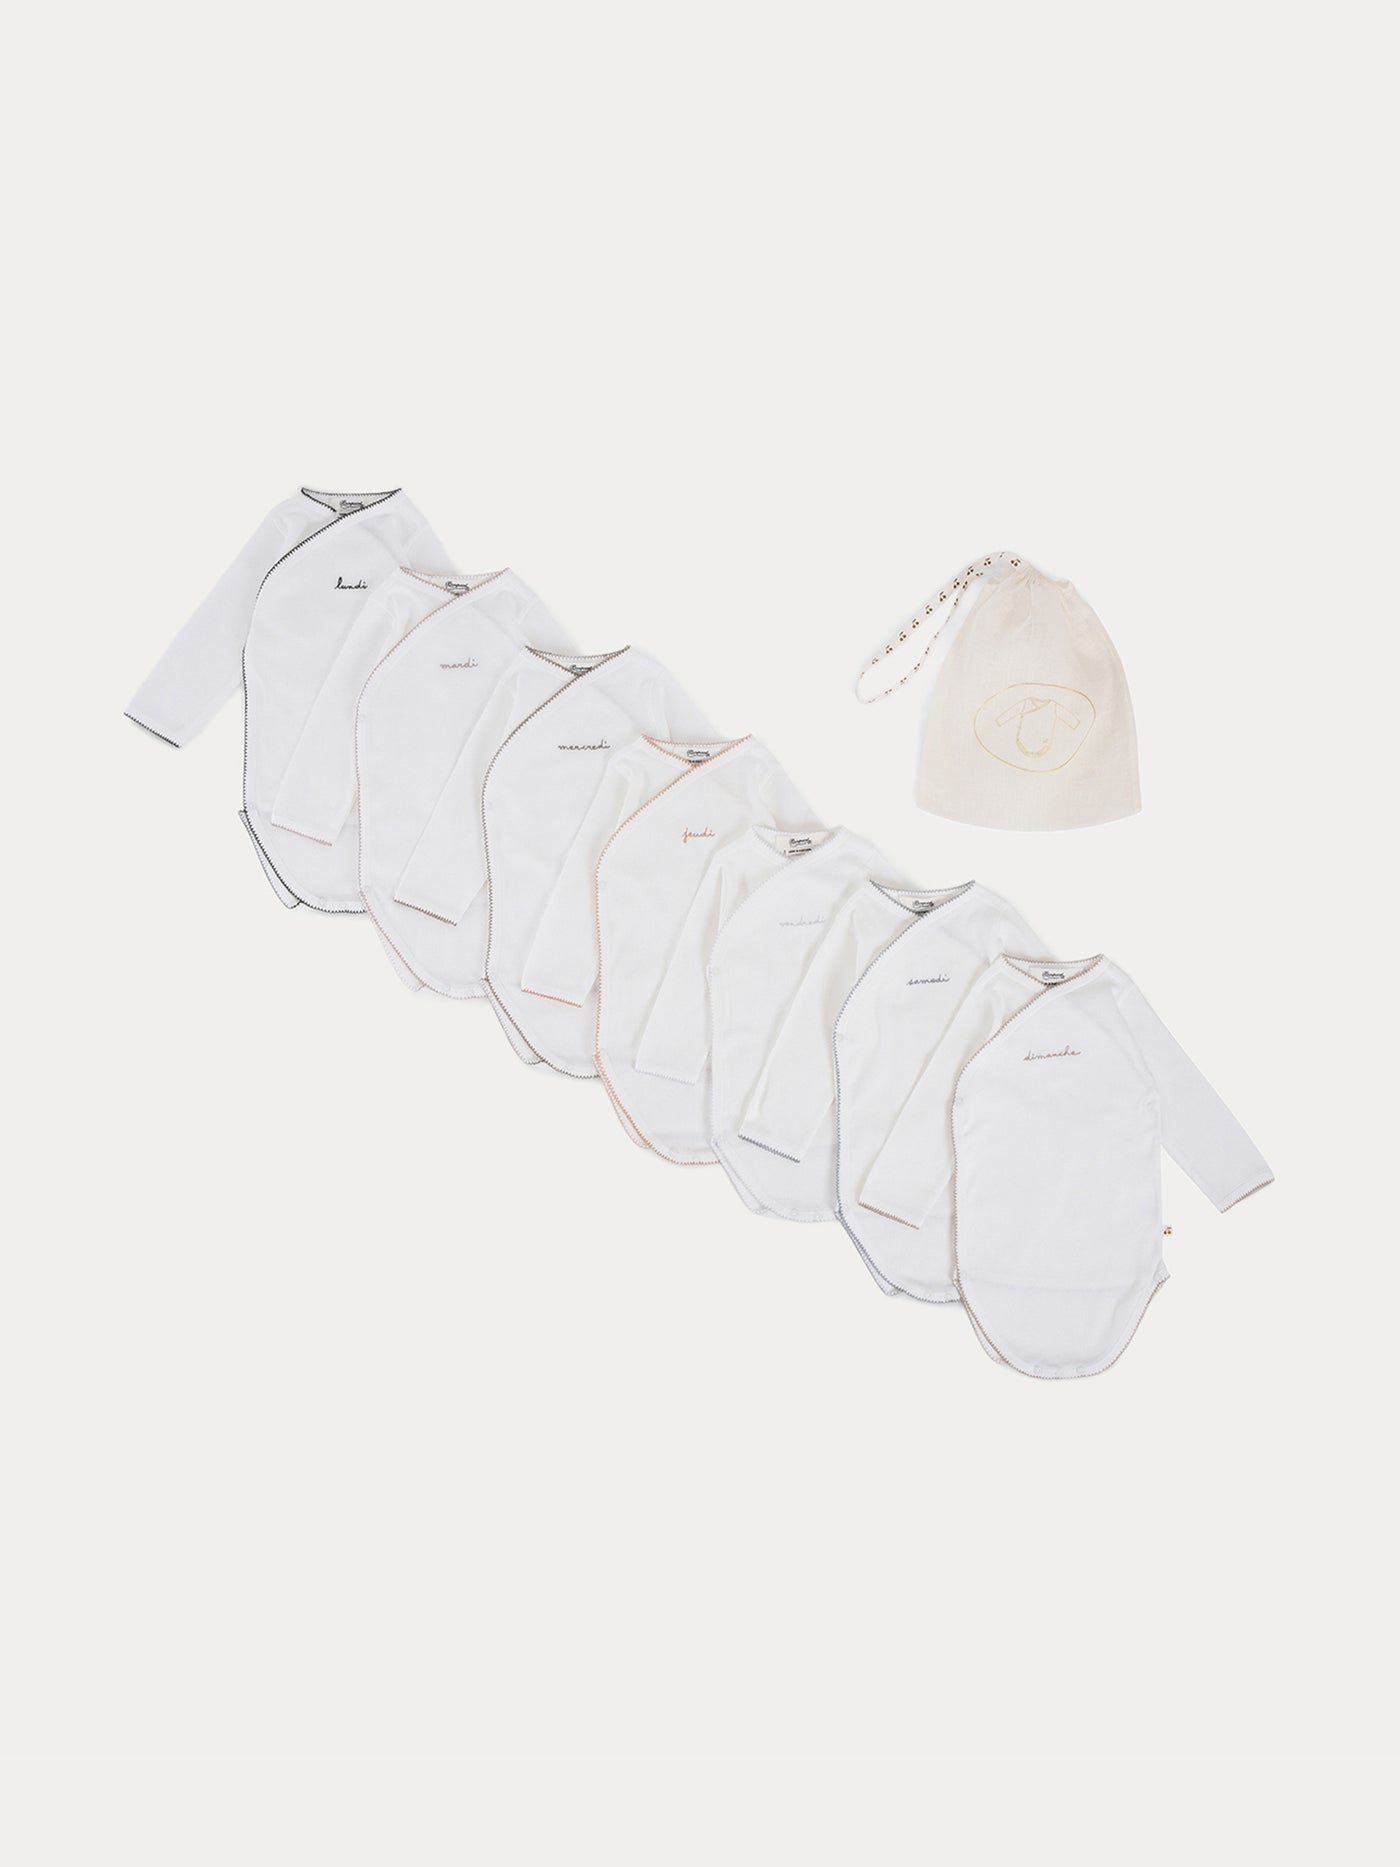 Lot of 7 White crossover bodysuits